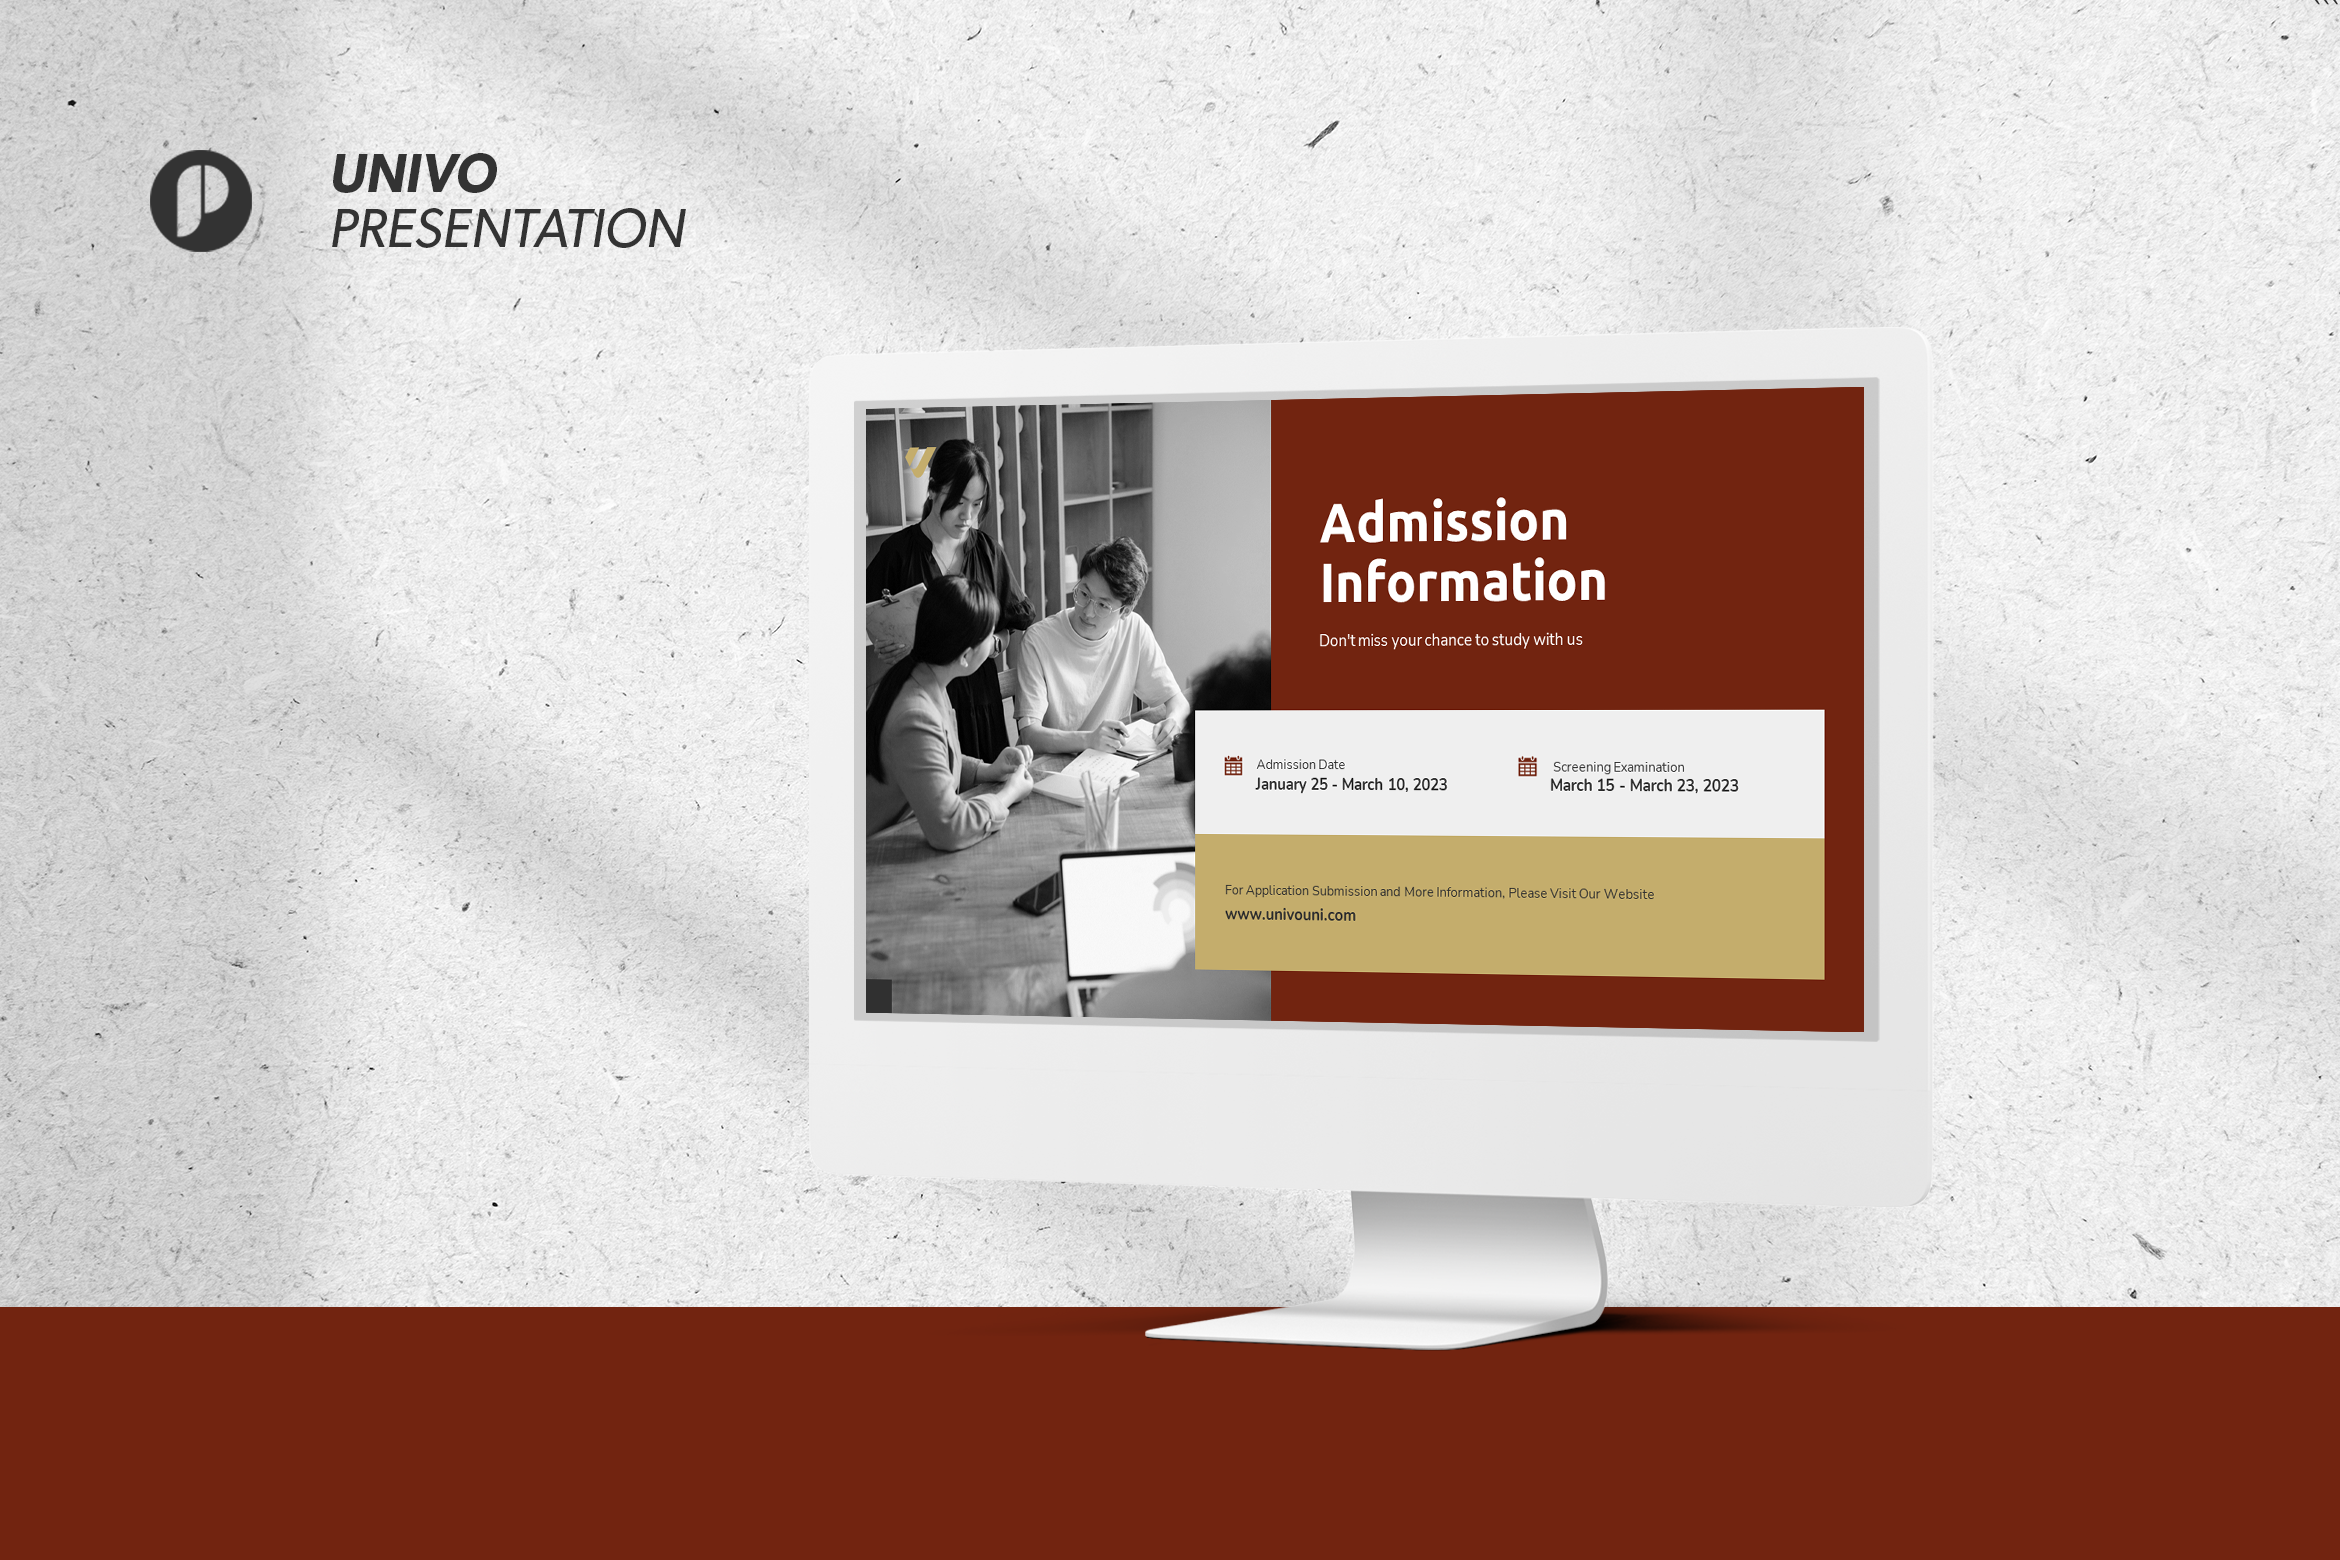 https://peterdraw.studio/wp-content/uploads/2022/11/Univo-%E2%80%93-Classy-Red-Simple-Modern-University-Profile-Presentation-with-Red-Gold-White-and-Black-colors-7.png